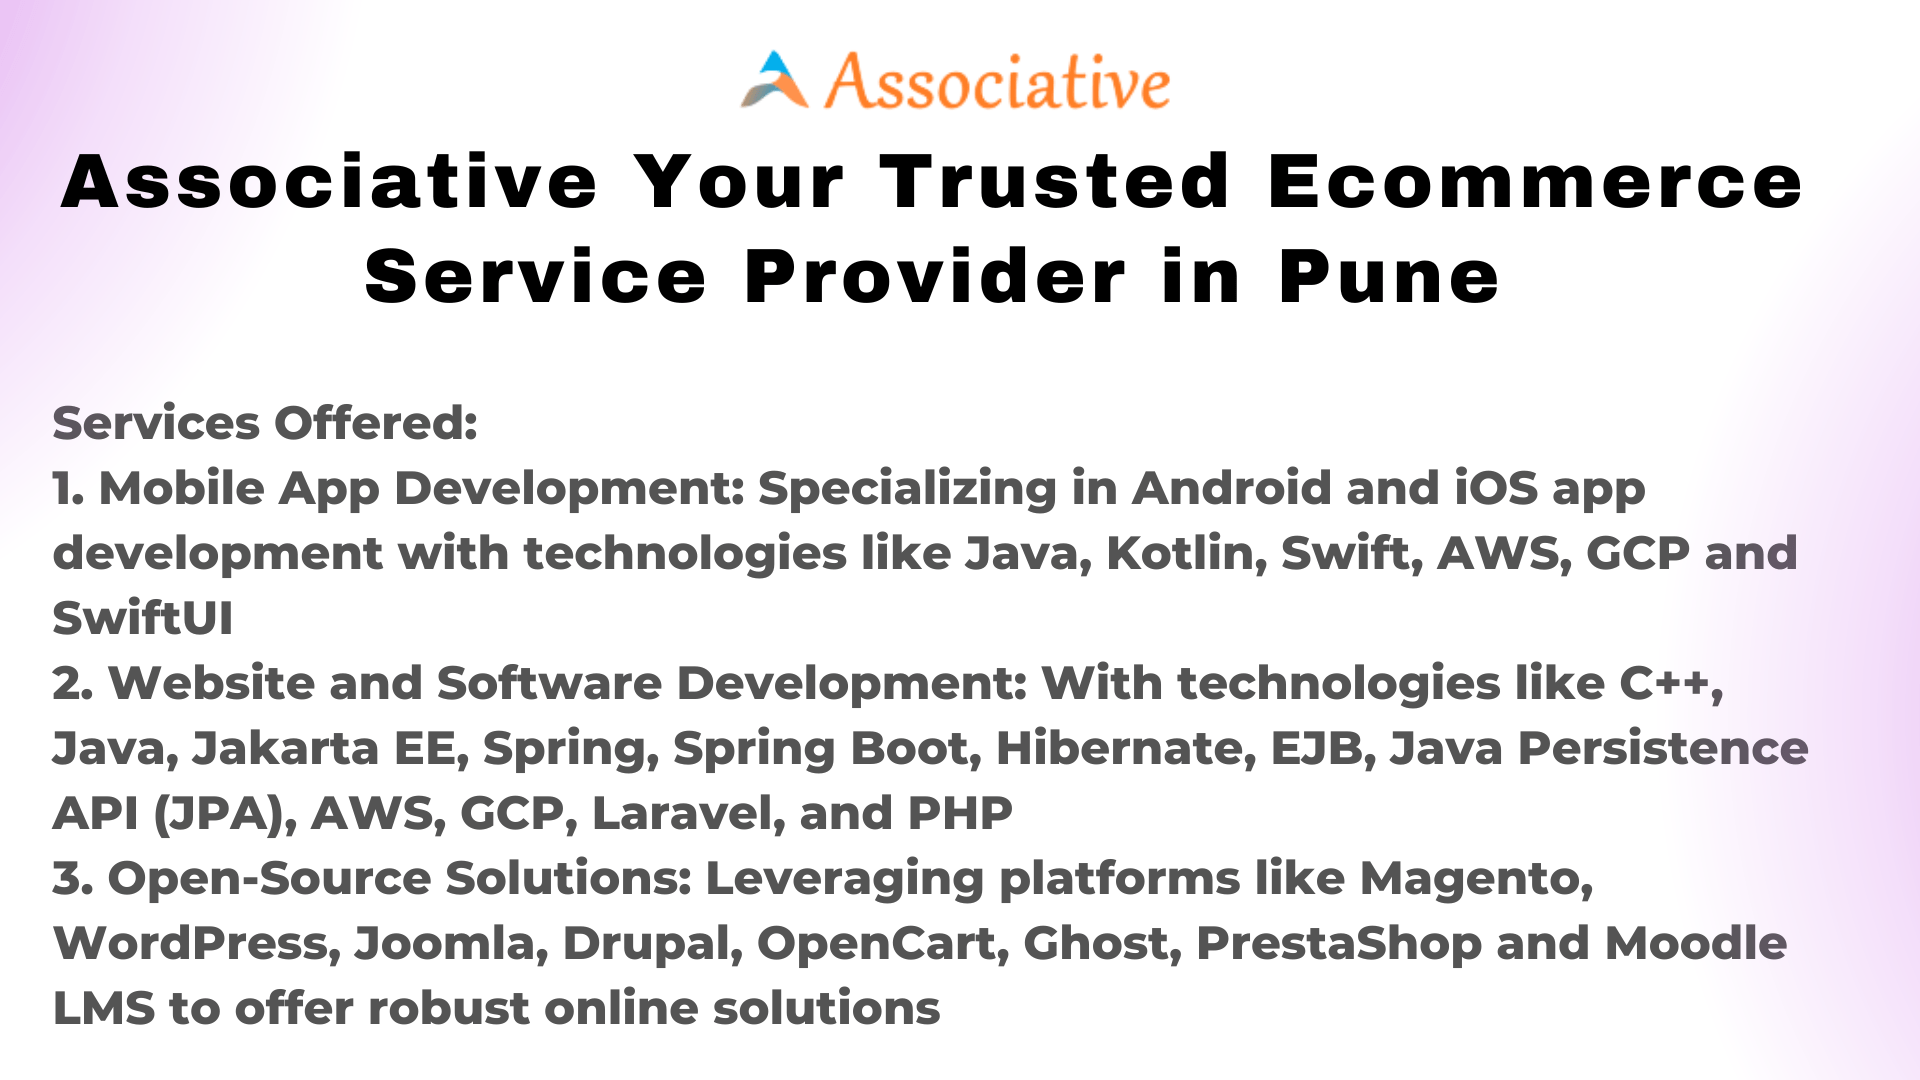 Associative Your Trusted Ecommerce Service Provider in Pune